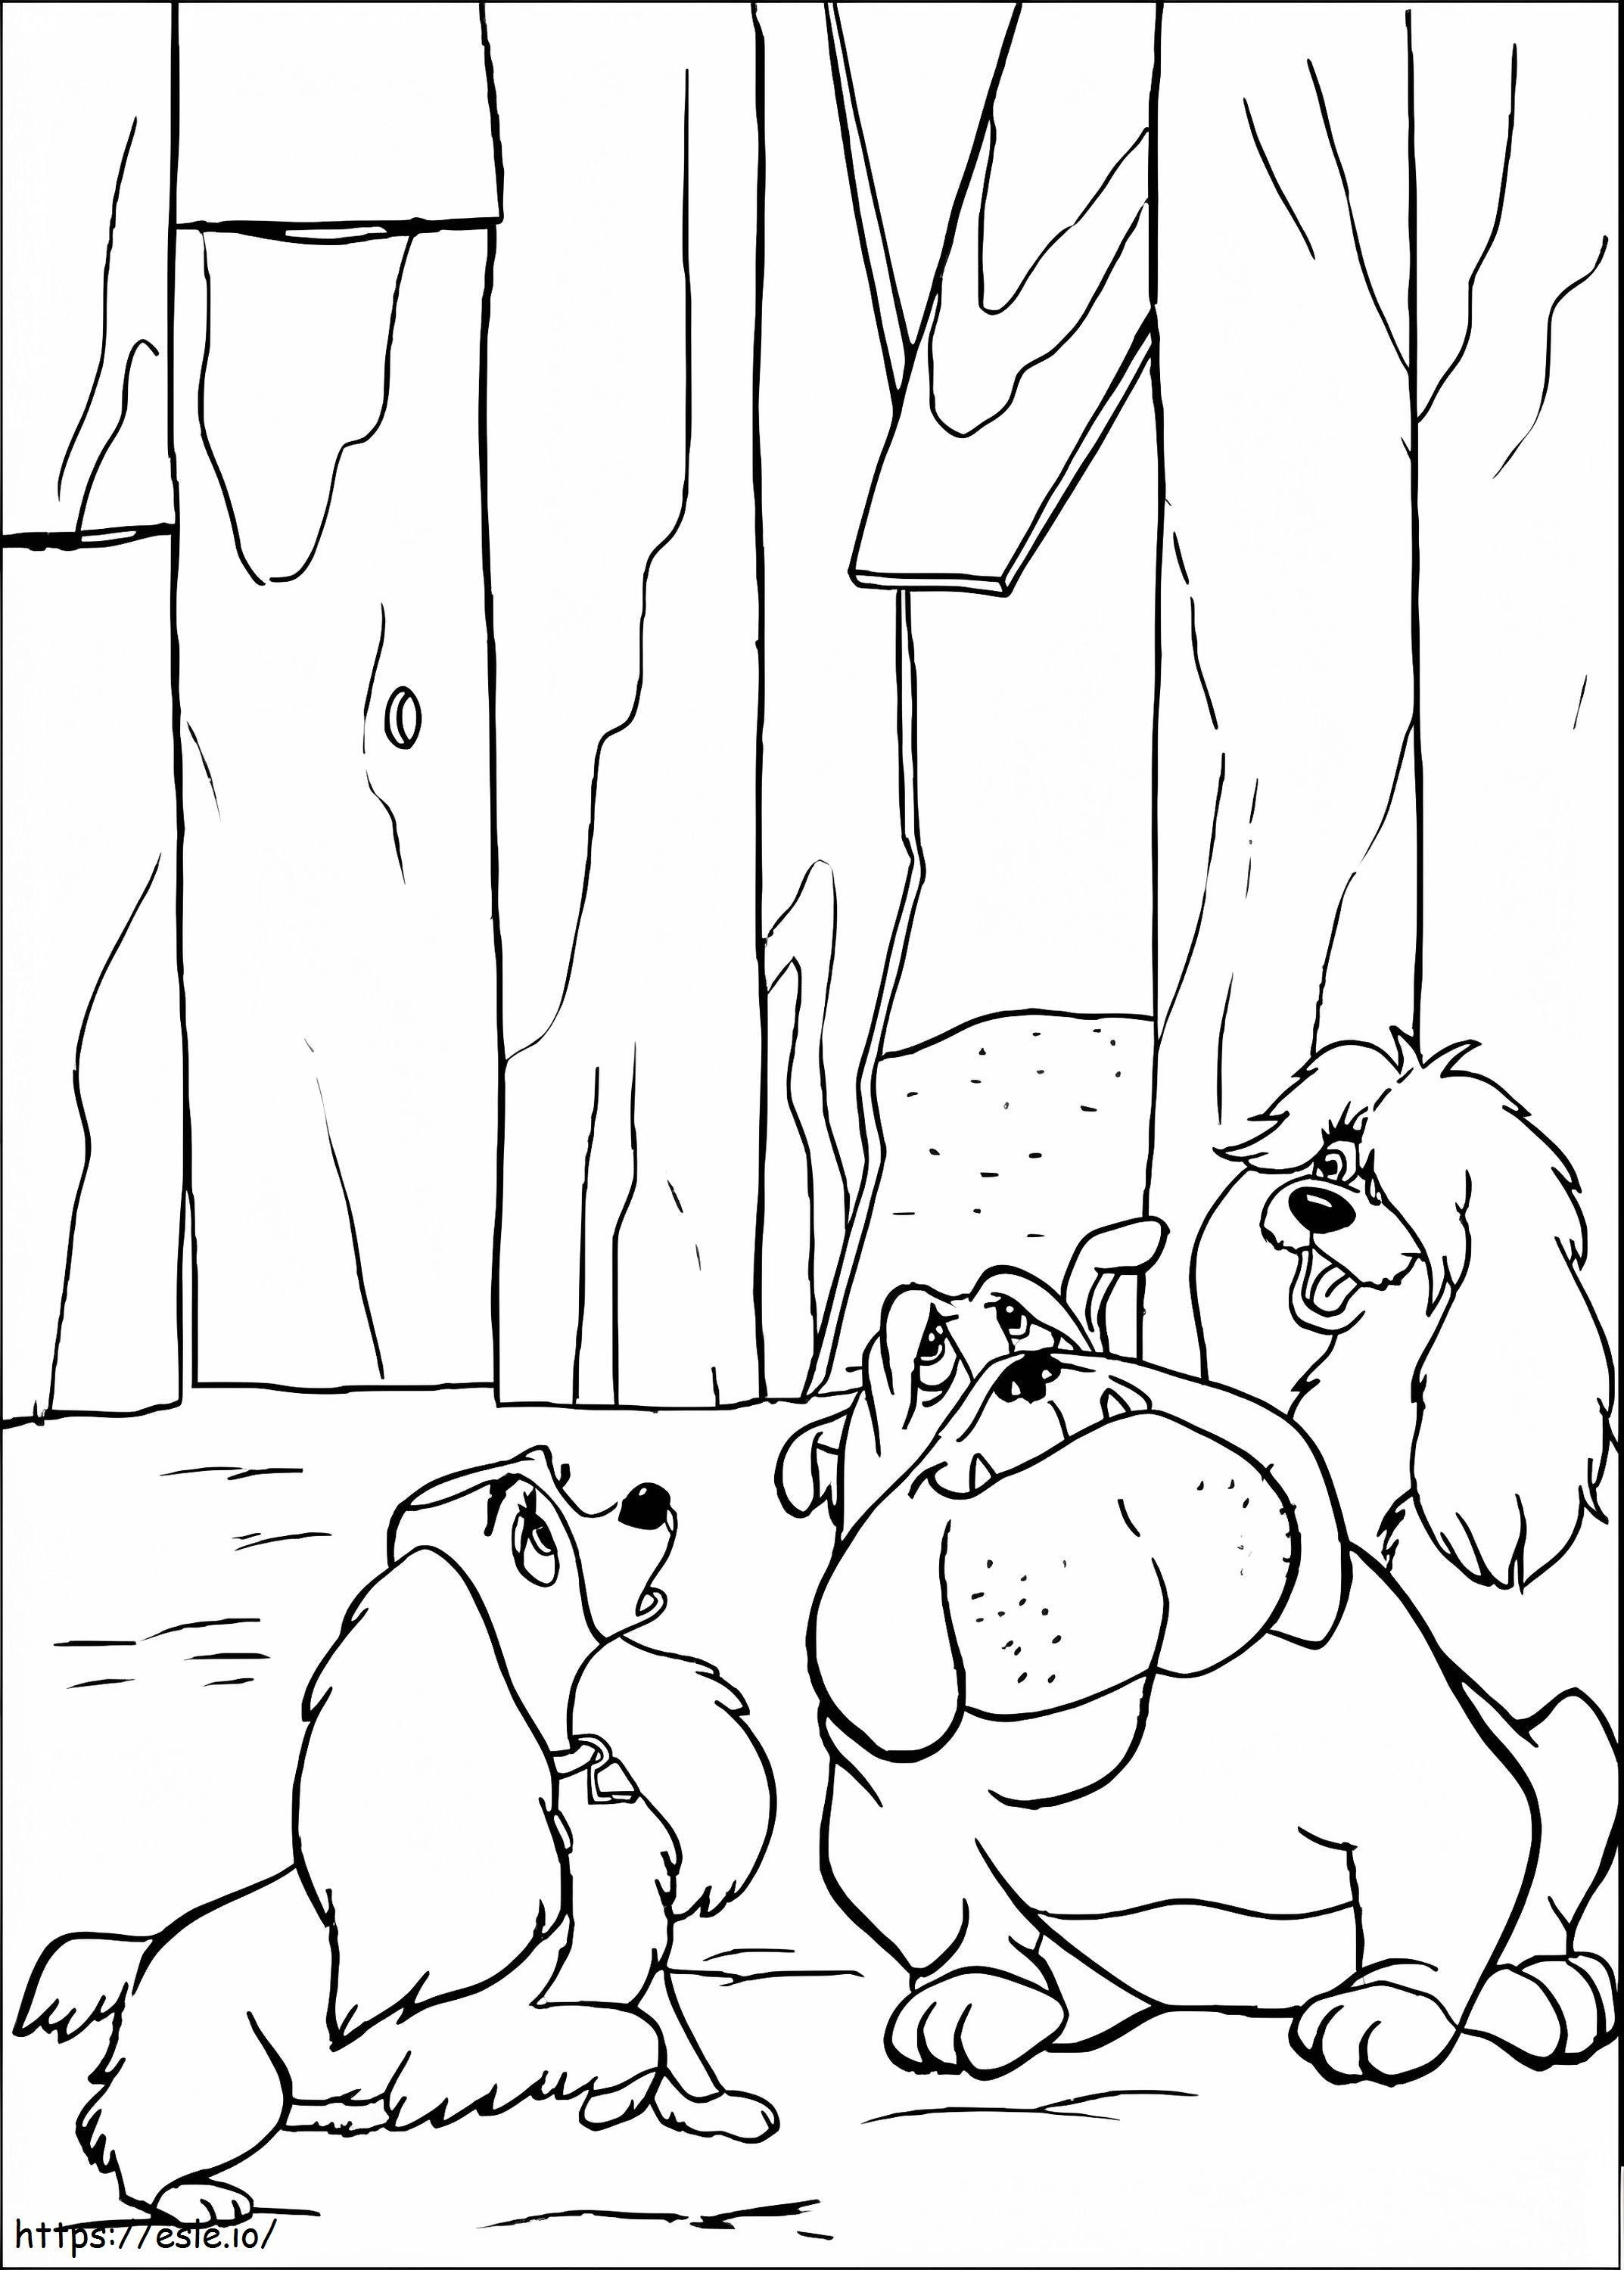 Lady And The Tramps Friends coloring page